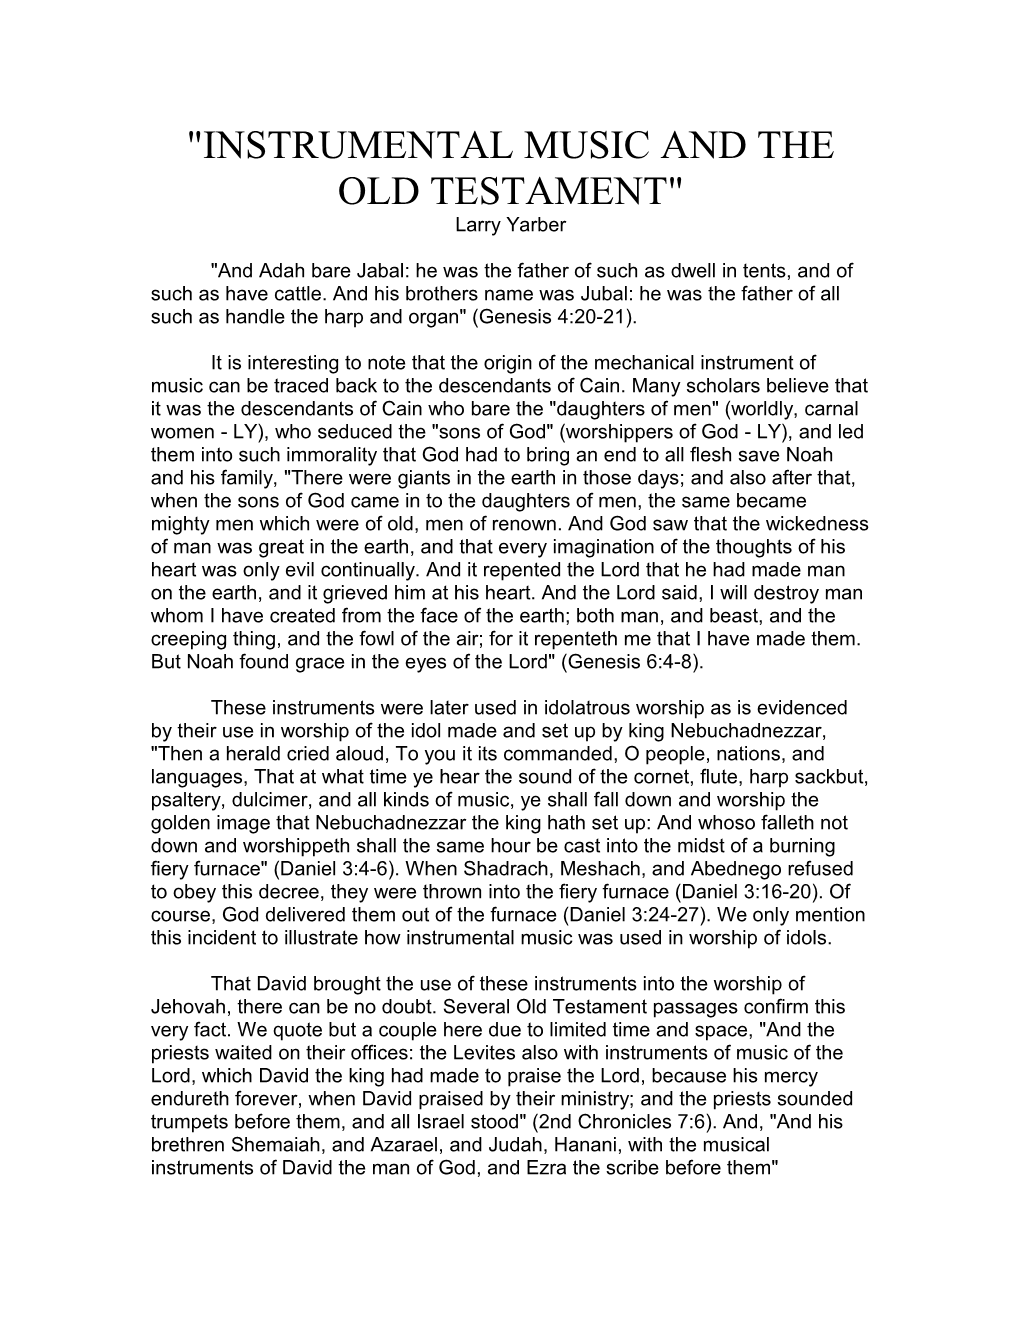 Instrumental Music and the Old Testament